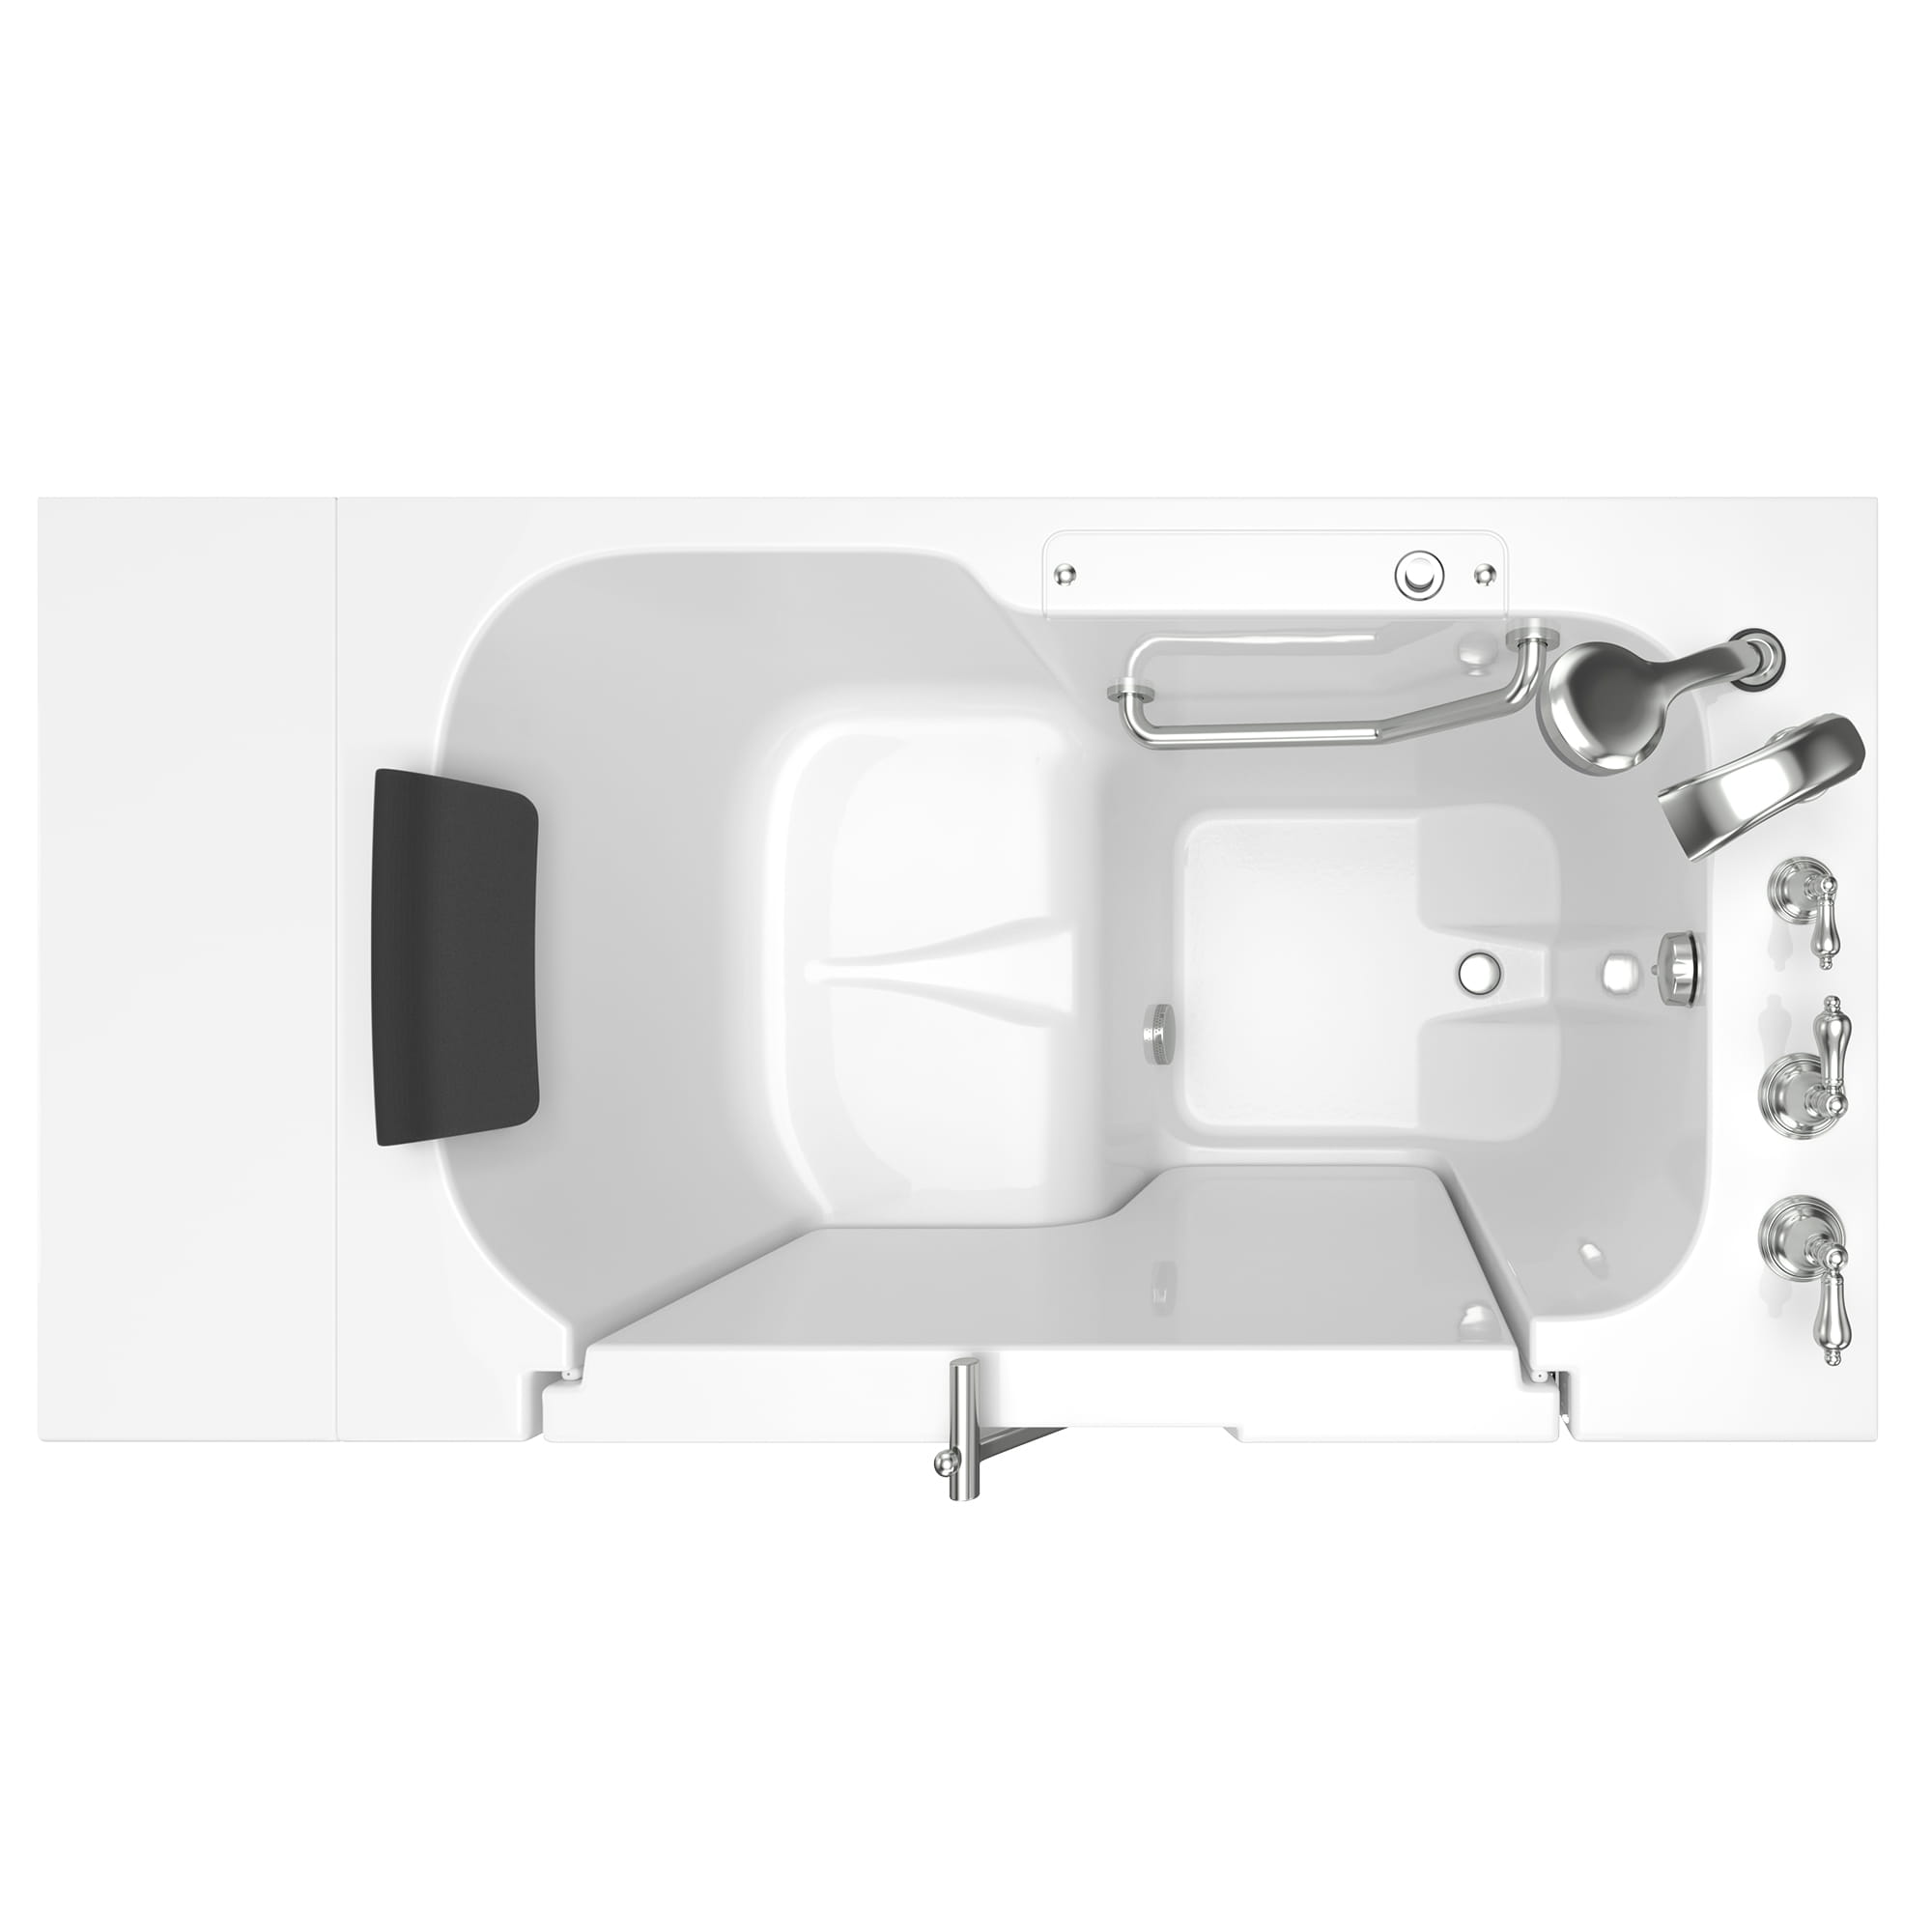 Gelcoat Premium Series 32 x 52 -Inch Walk-in Tub With Soaker System - Right-Hand Drain With Faucet